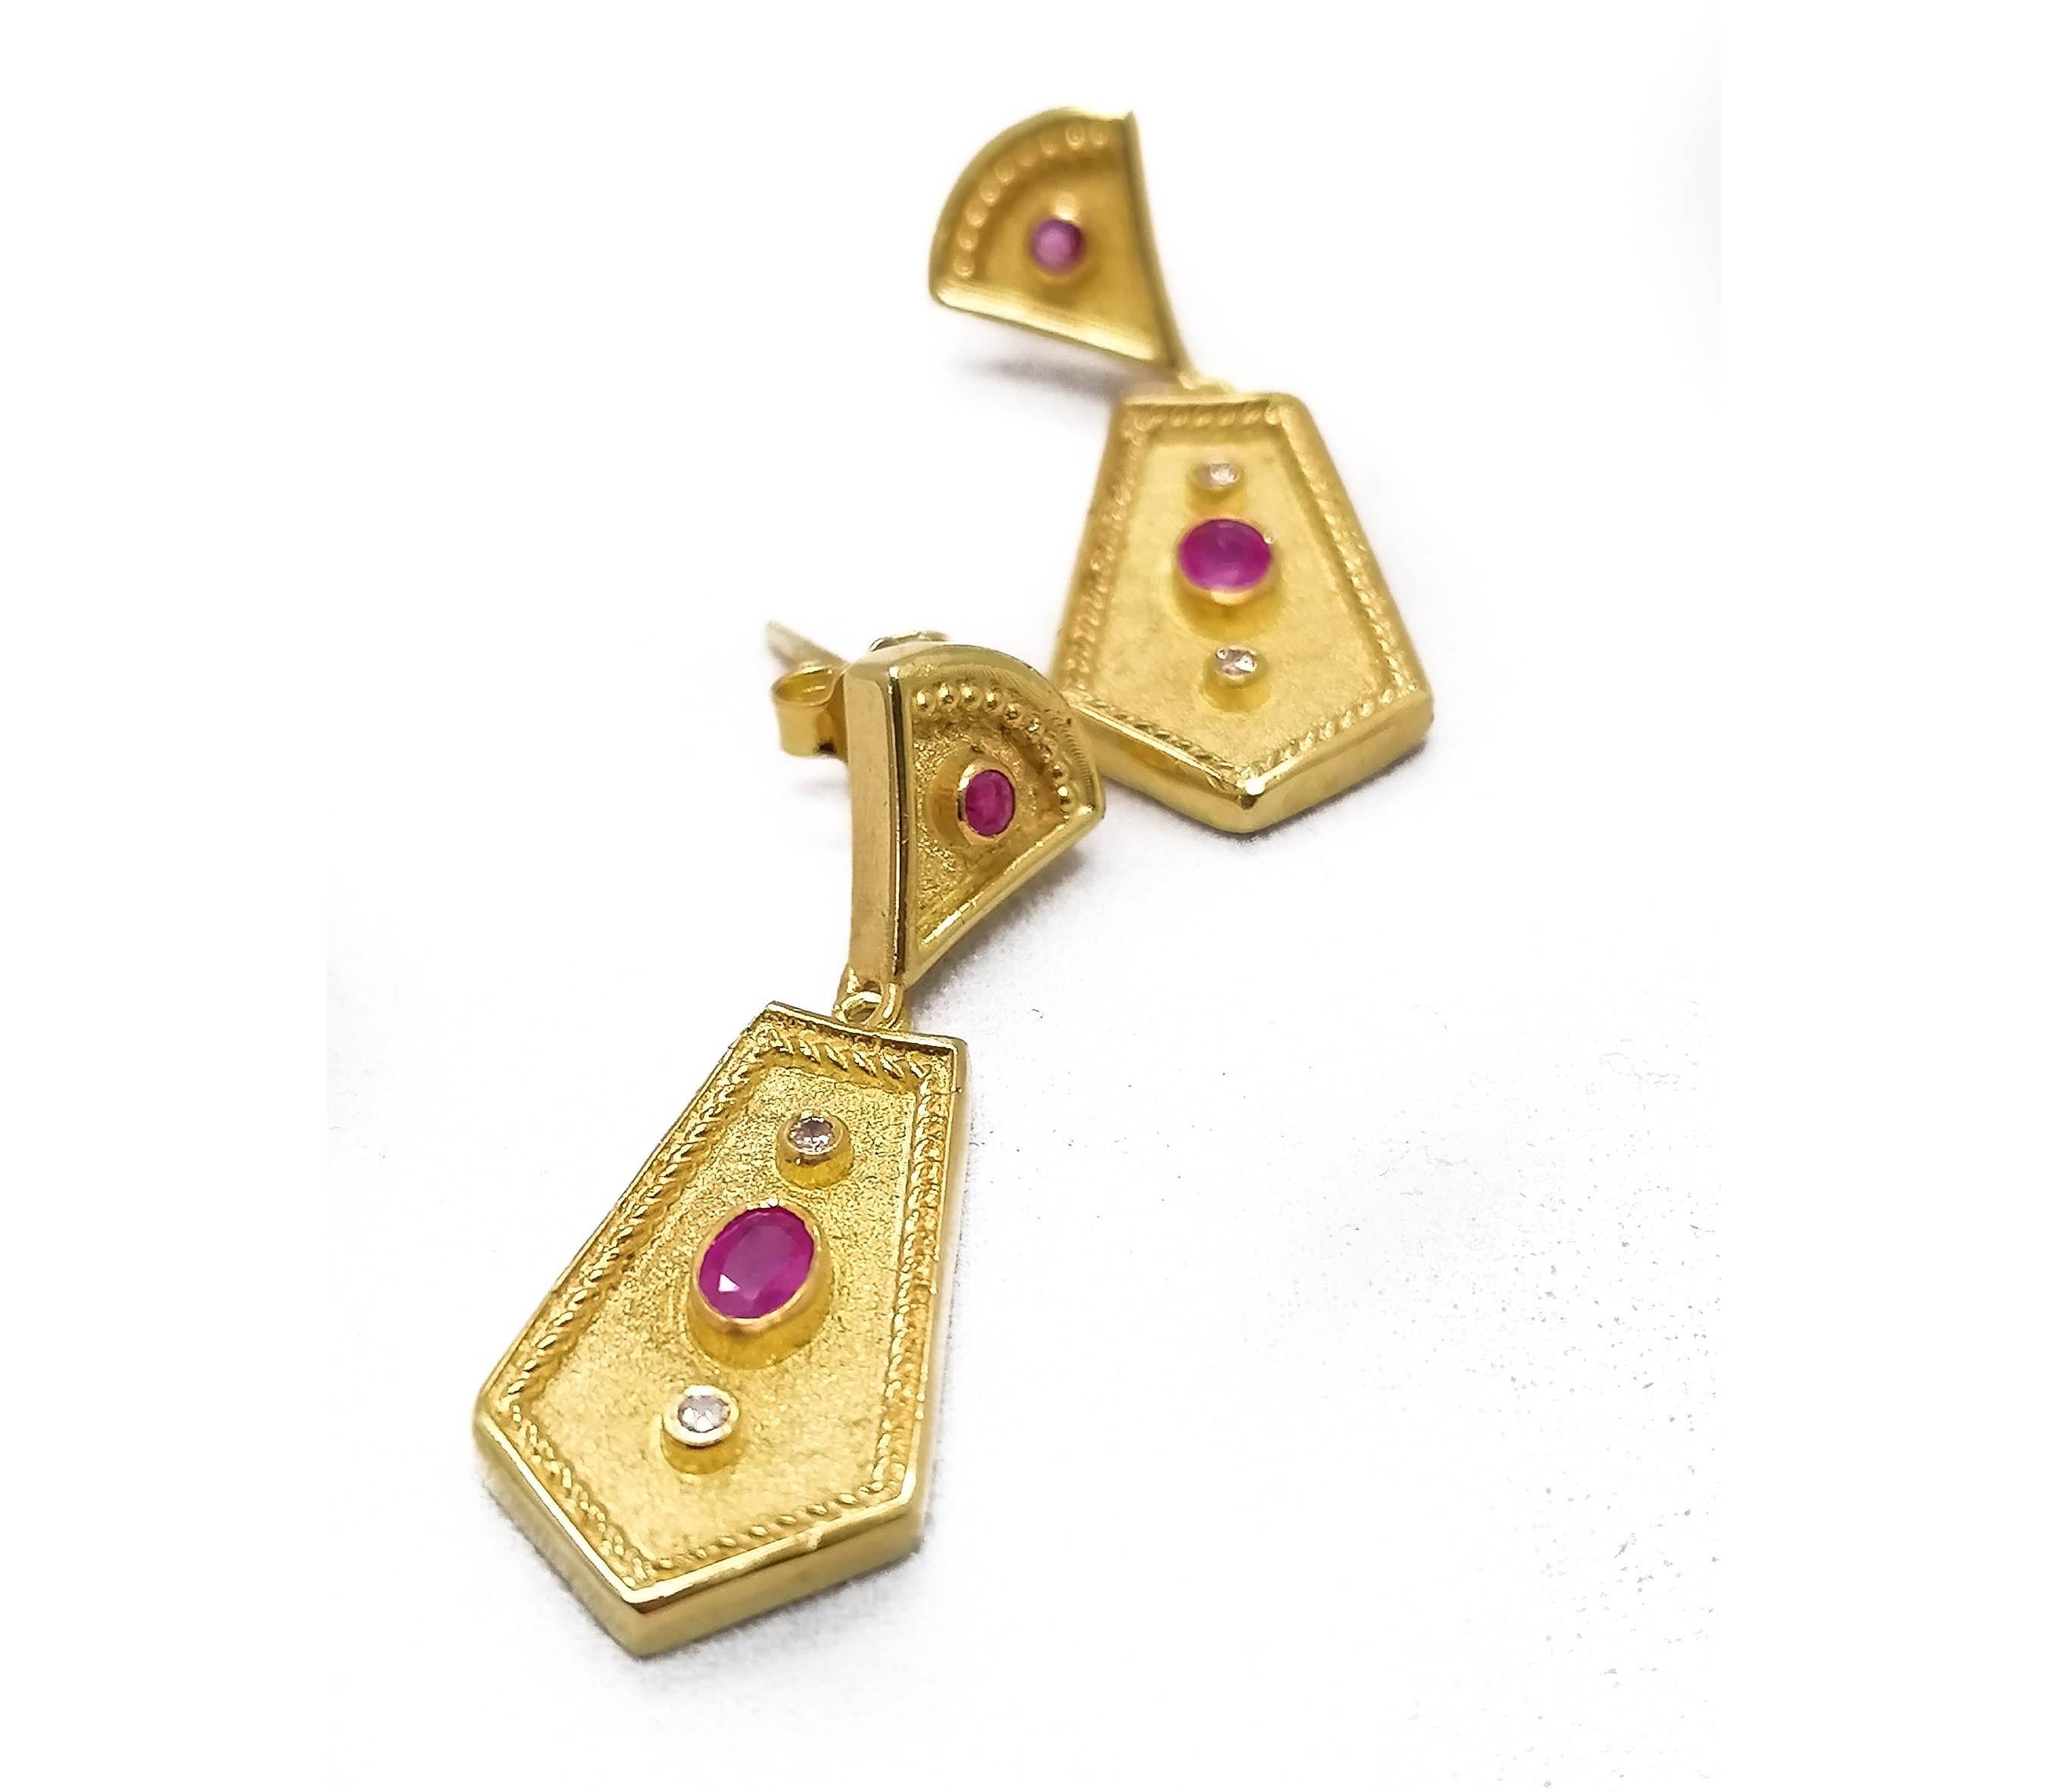 These S.Georgios designer Etruscan-style gorgeous earrings are hand made from 18 Karat Yellow Gold and decorated with granulation workmanship done under a microscope. These beautiful earrings feature 4 natural Rubies, 2 Oval-cut and 2 brilliant-cut,